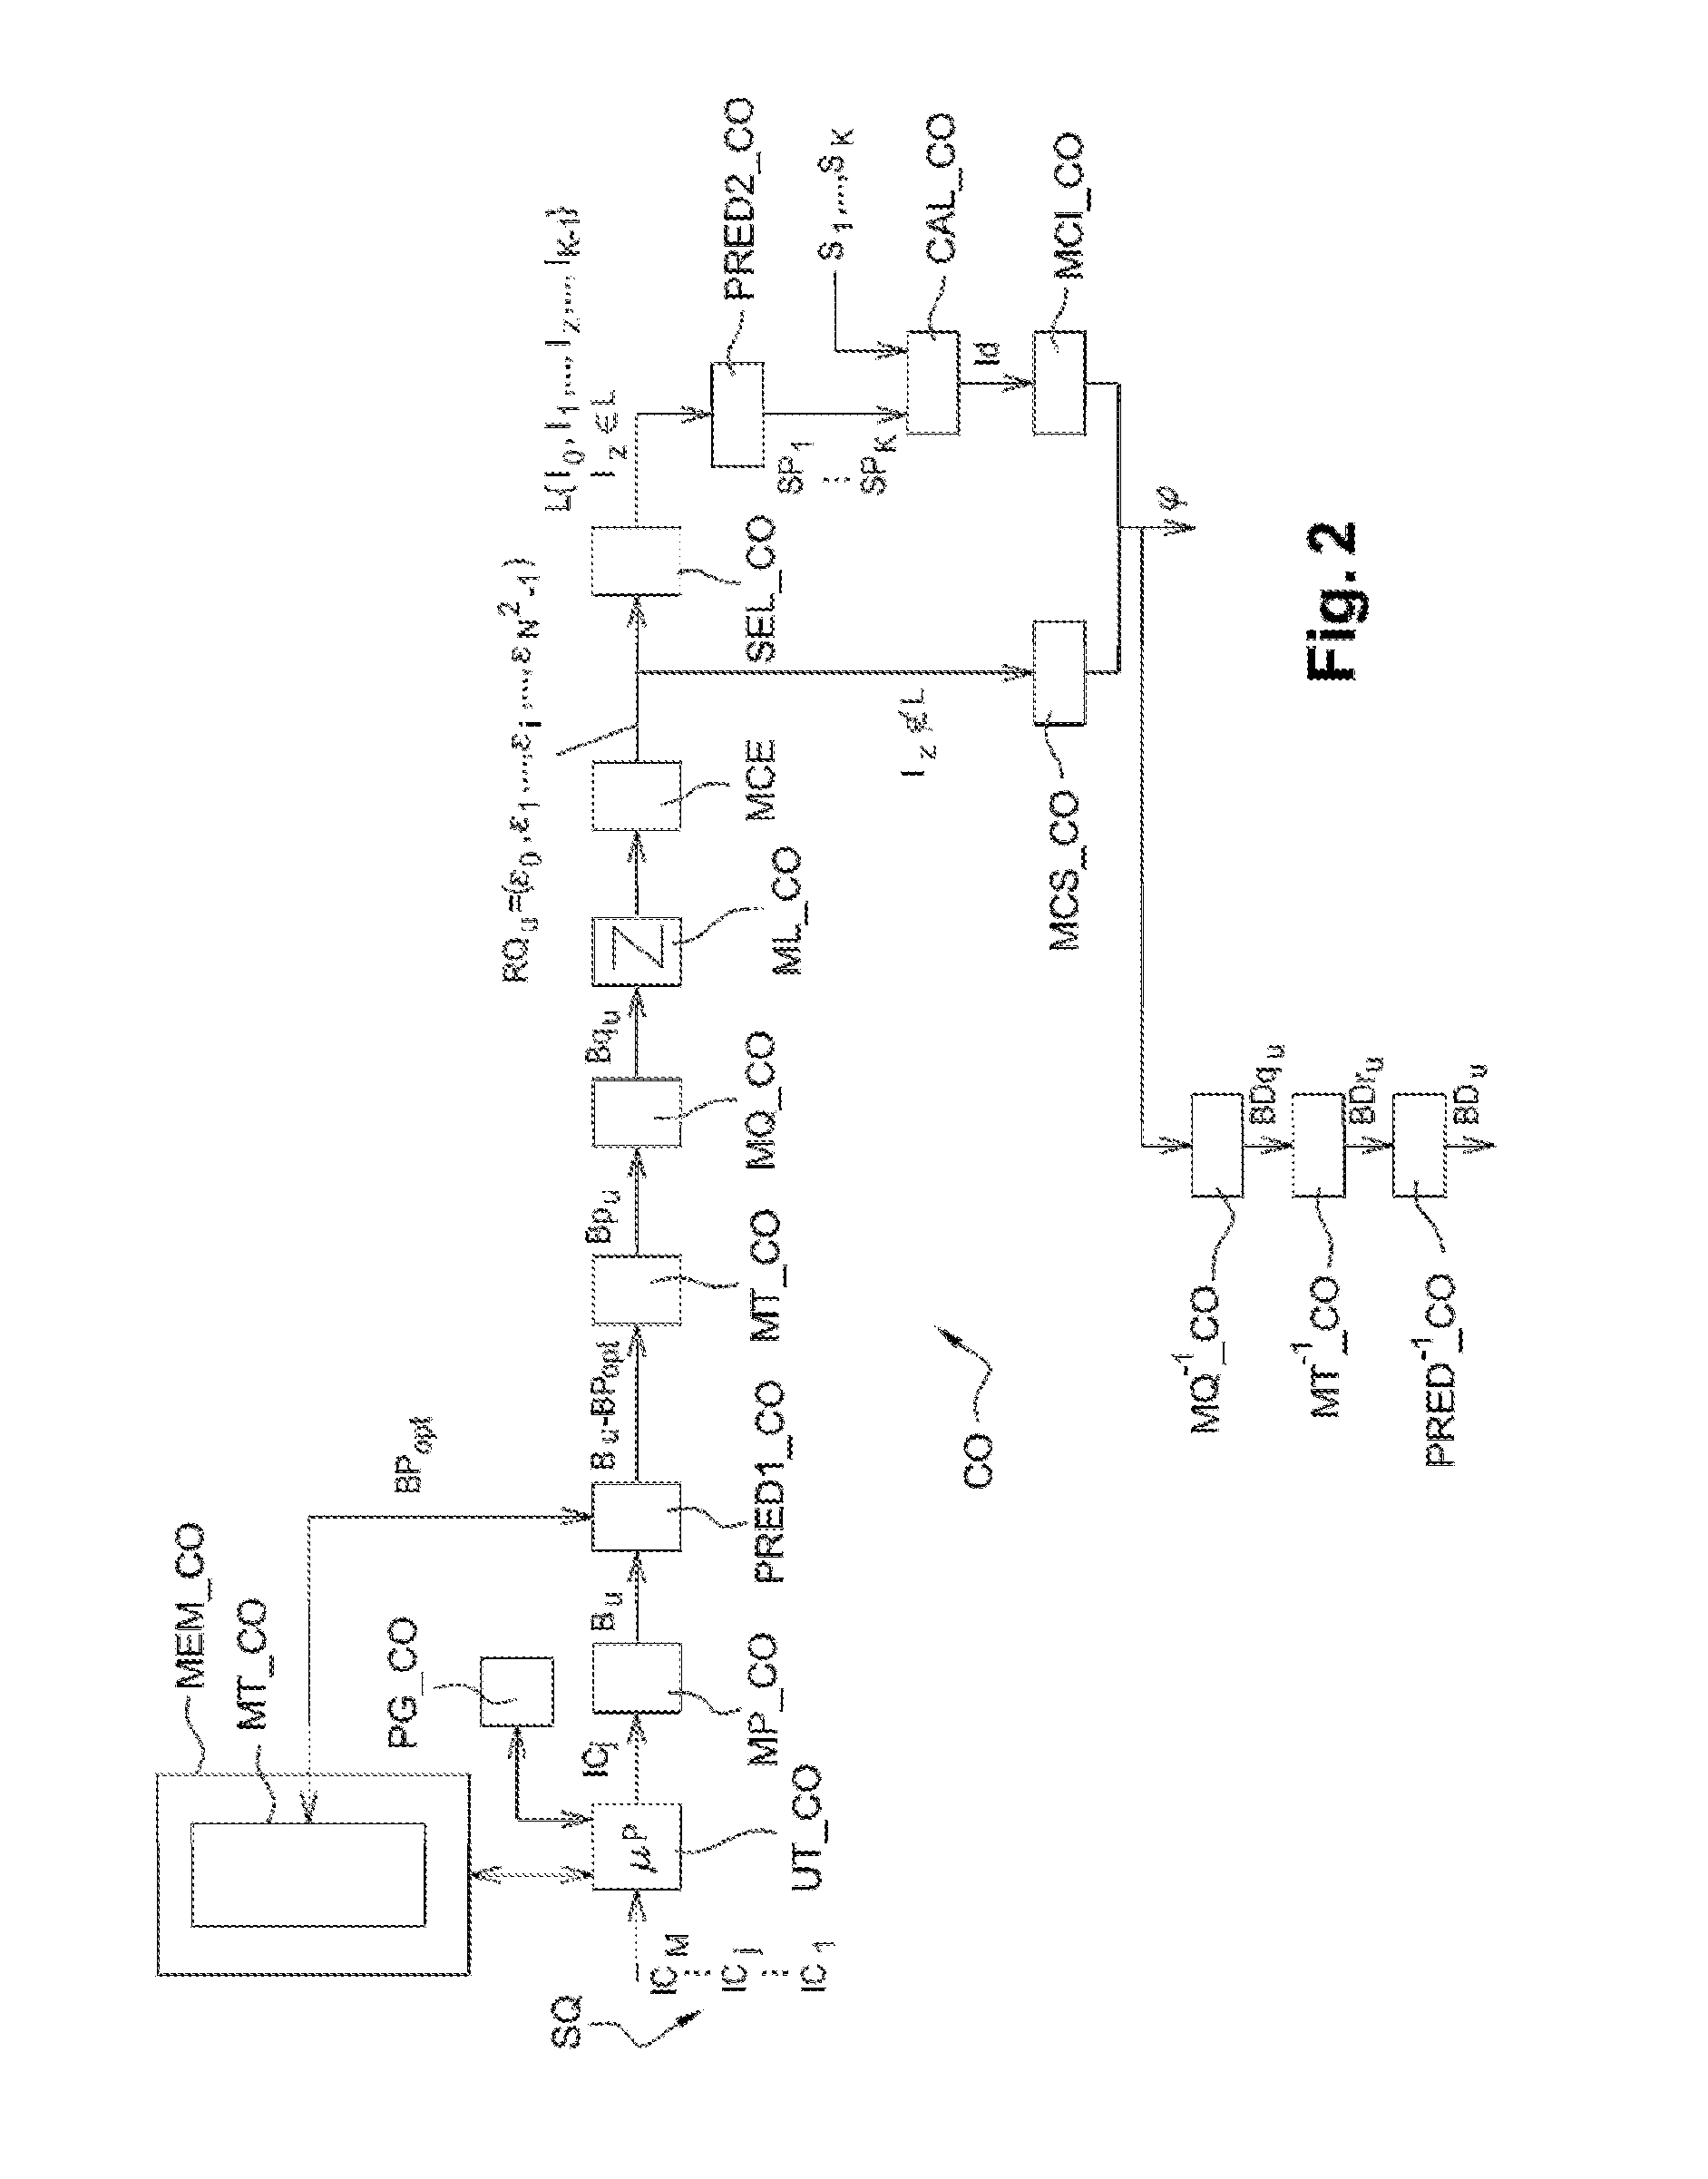 Method for encoding and decoding images, device for encoding and decoding images and corresponding computer programs